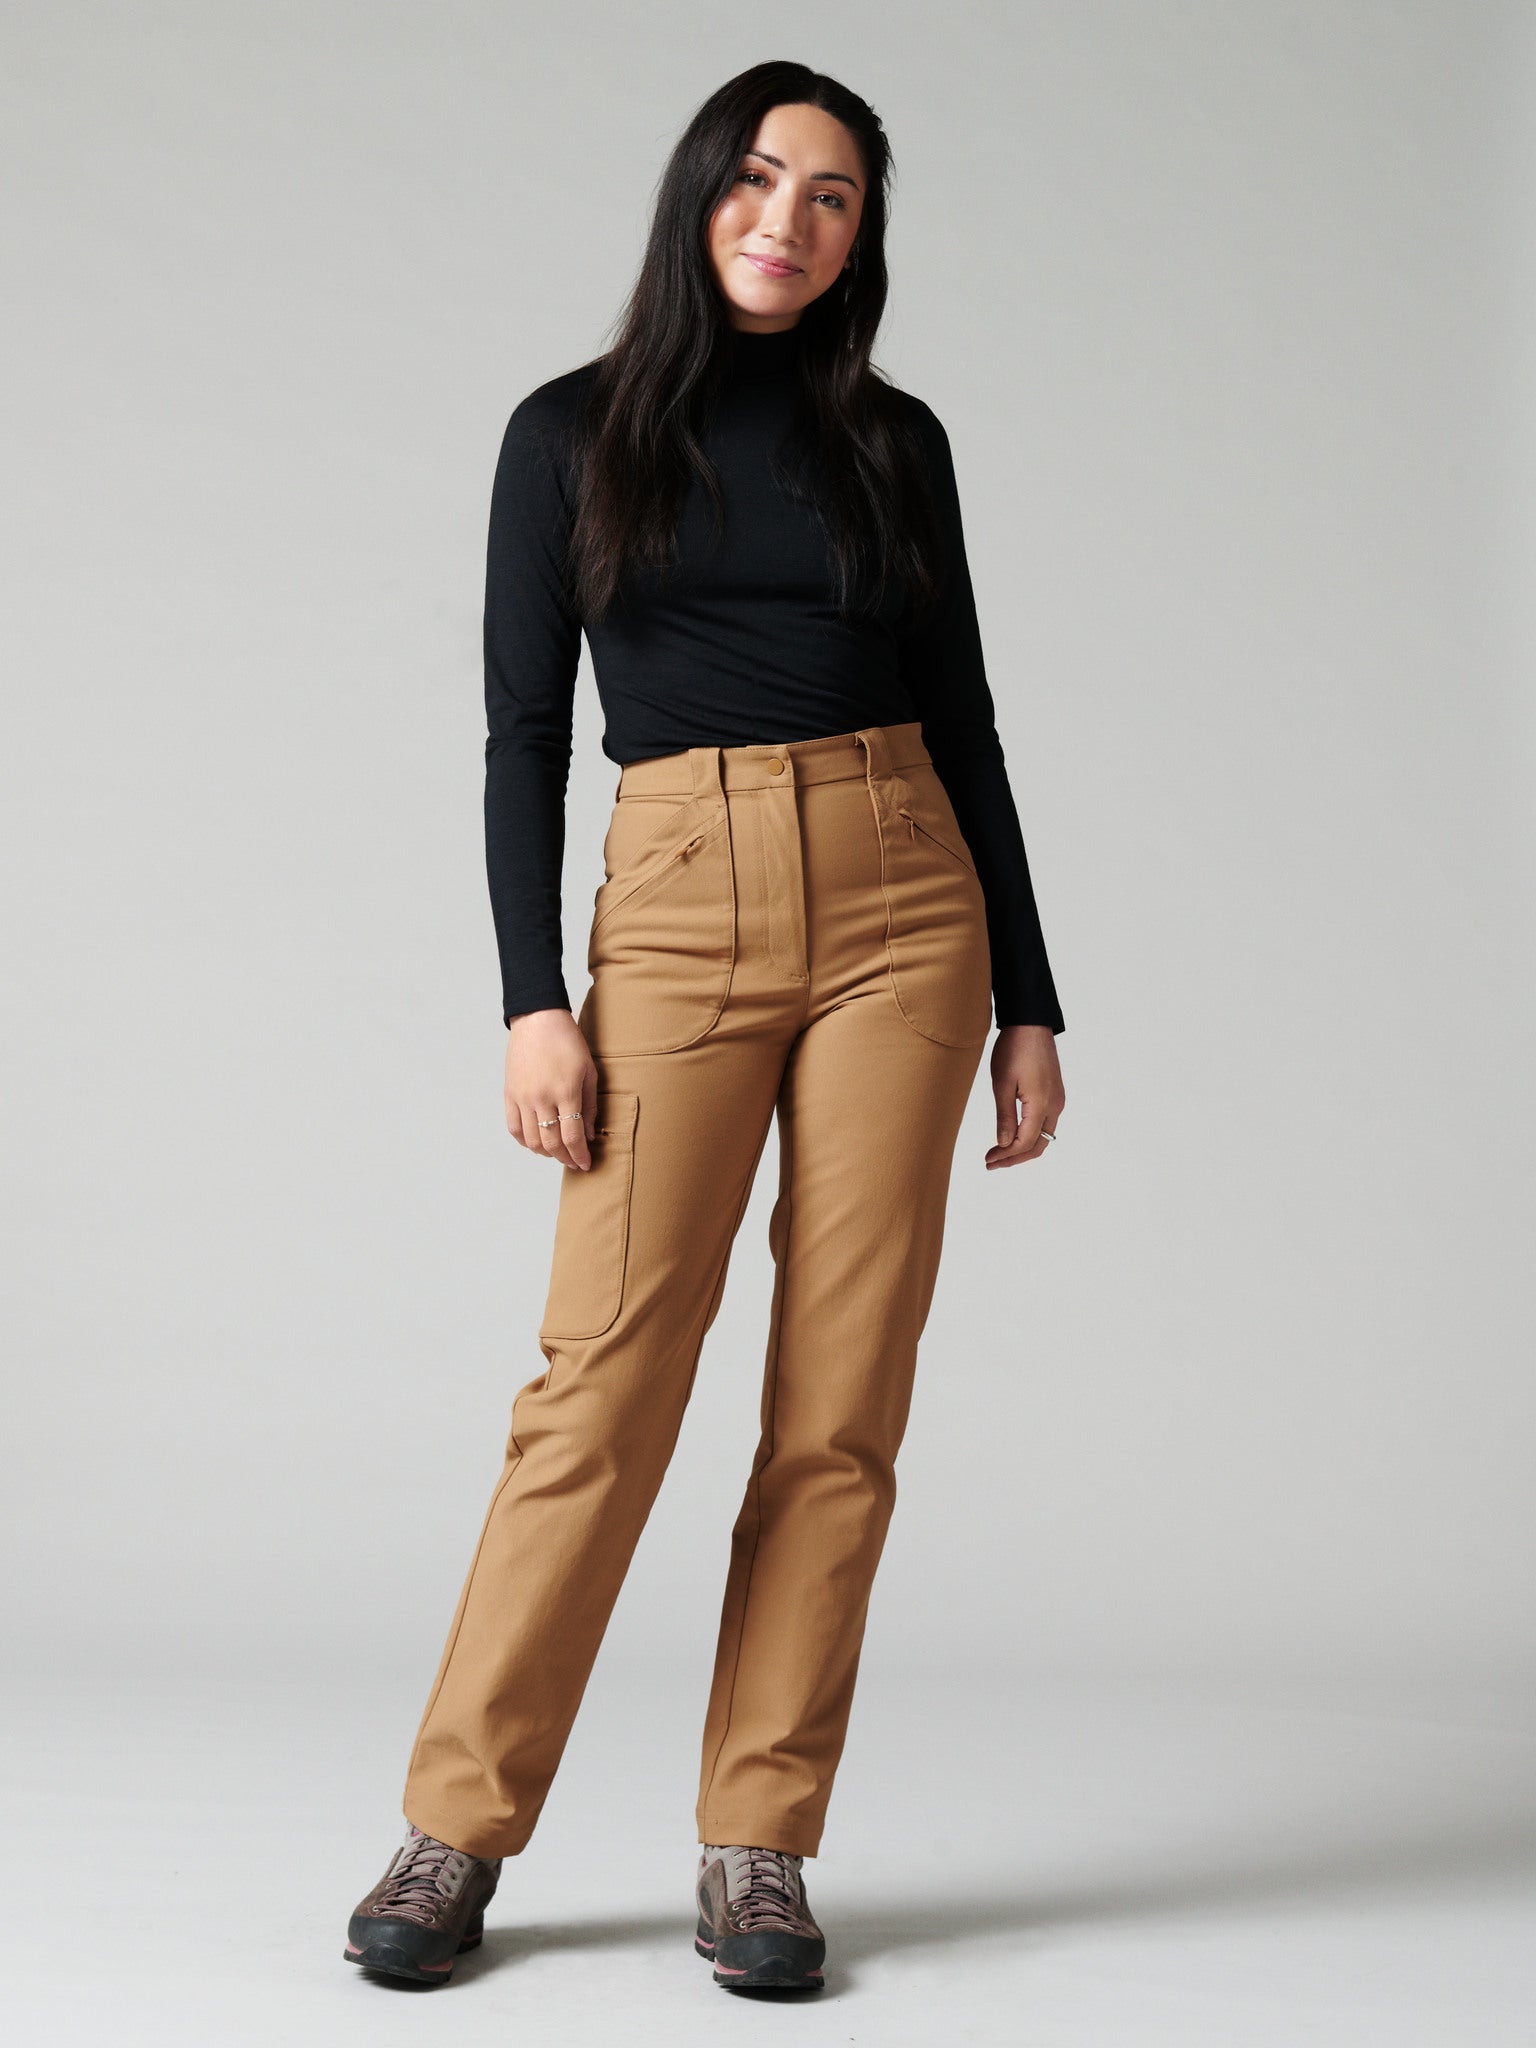 Women's outdoor pants, High waist and stretchy